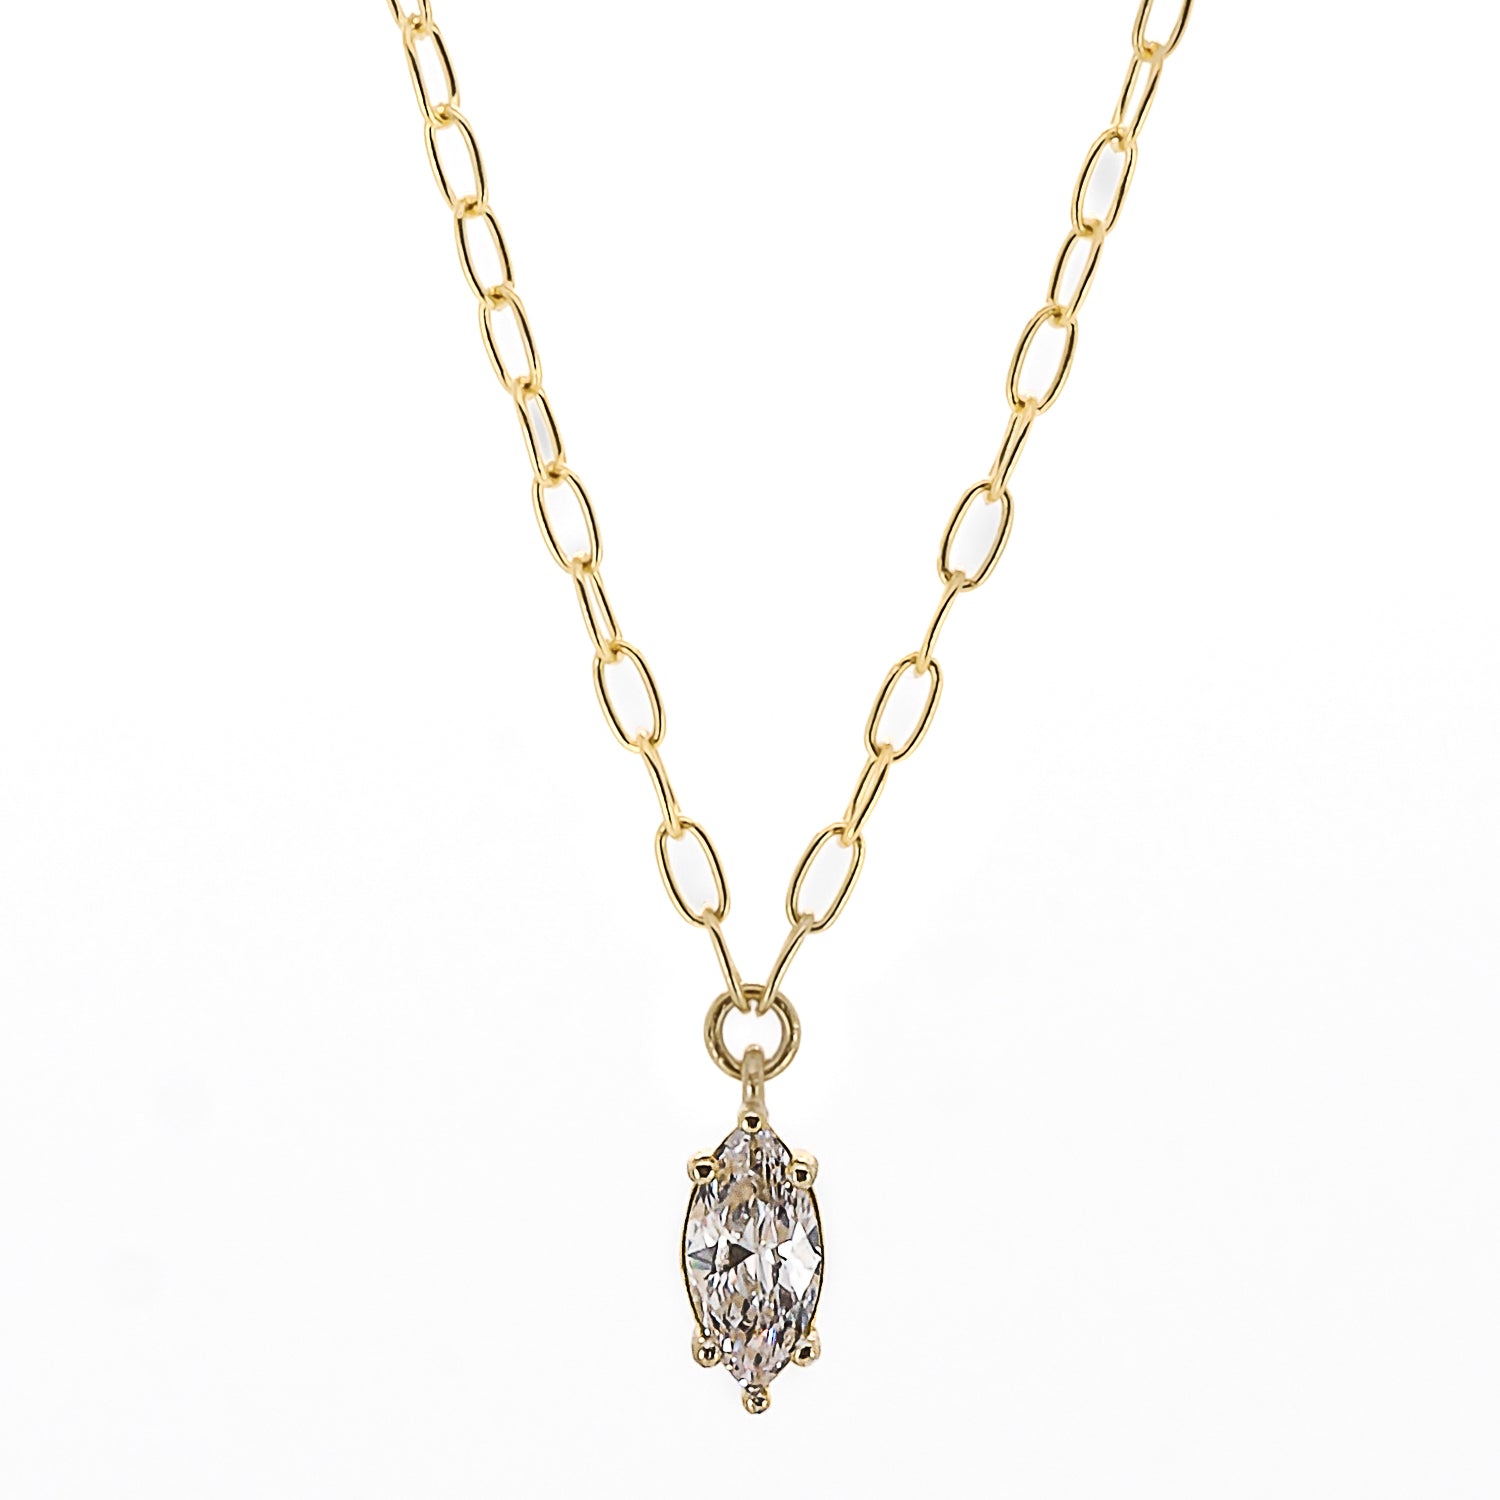 The Gold and Diamond Chain Necklace, a captivating piece featuring a stunning CZ Diamond pendant on an 18K gold plated chain.